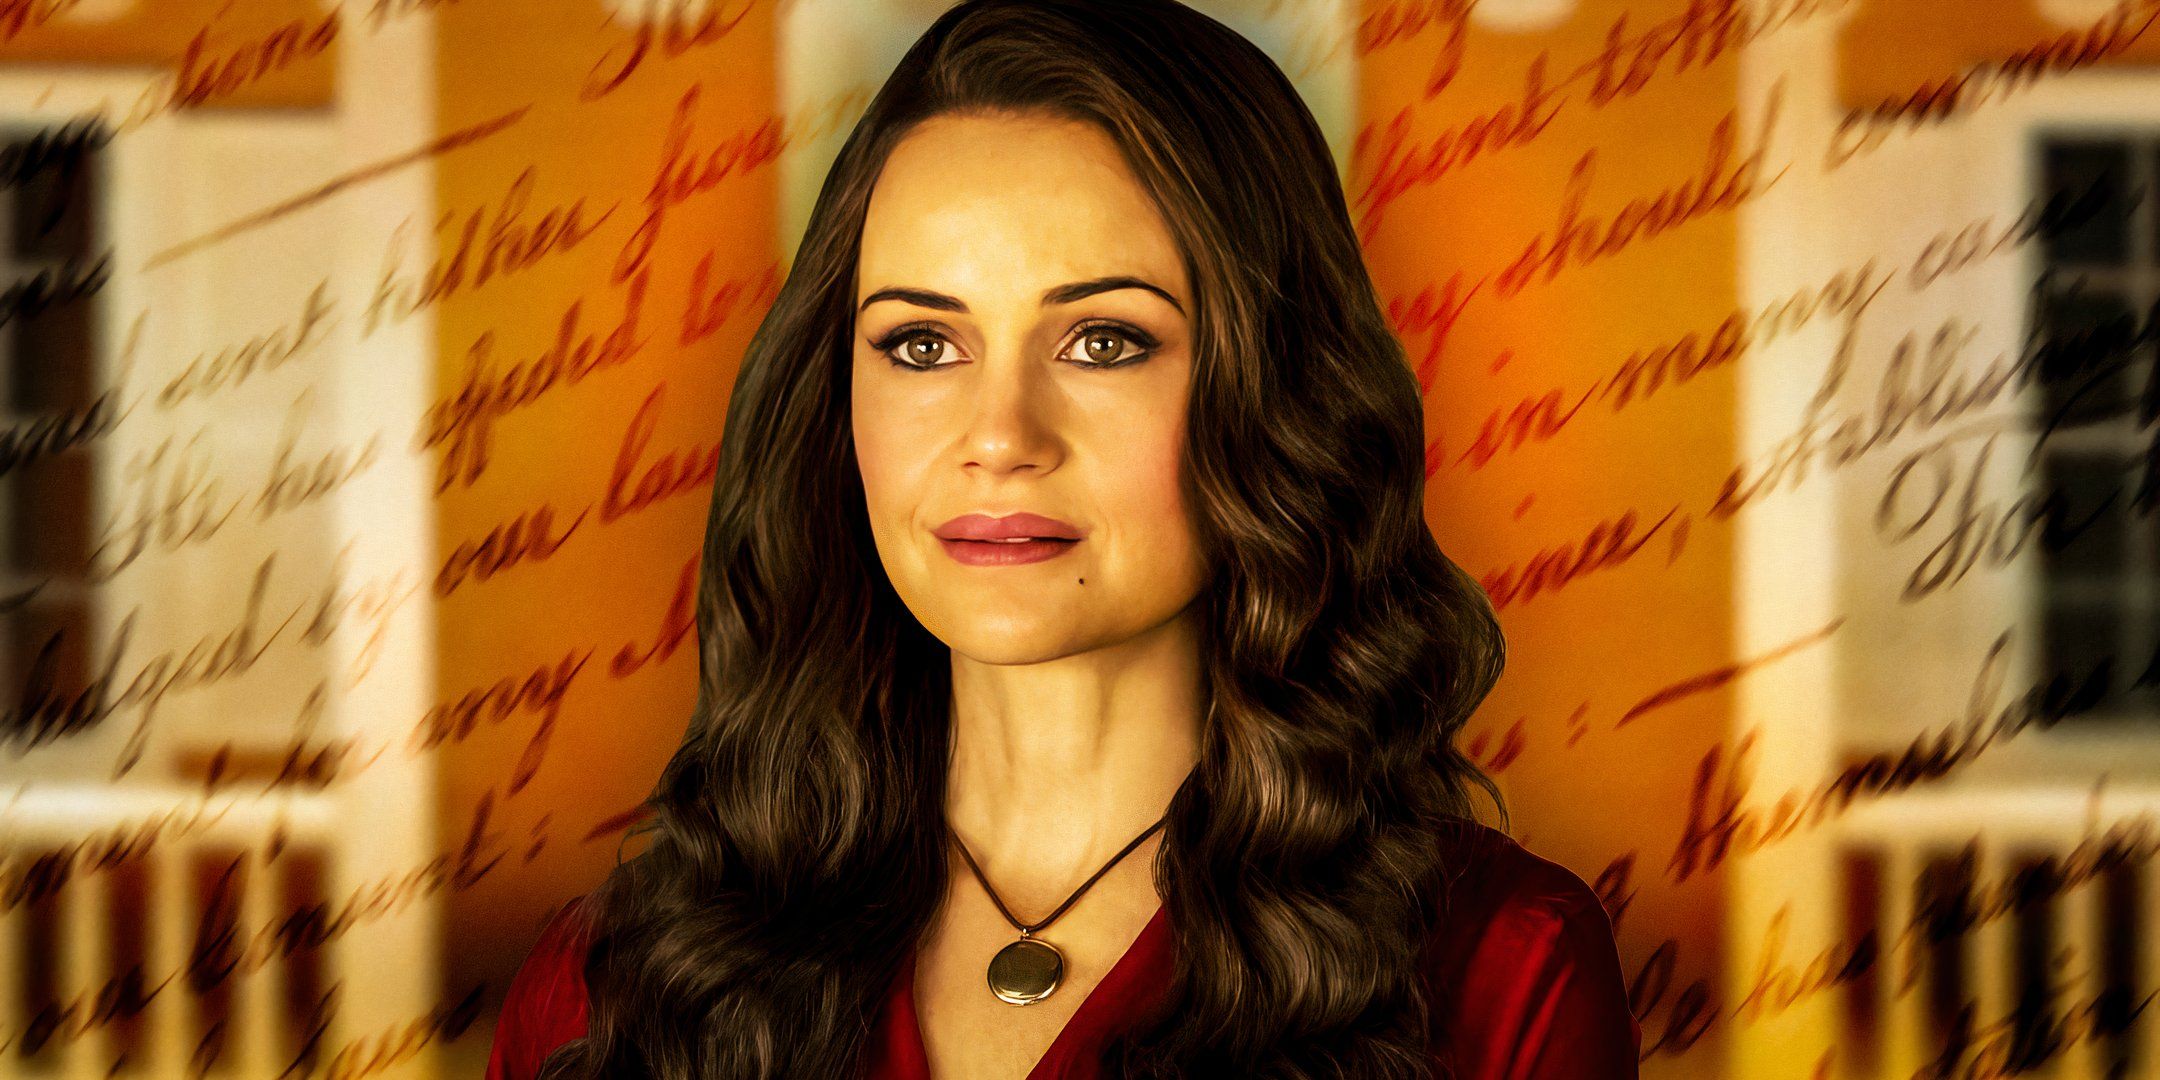 Carla-Gugino-as-Olivia-Crain-from-The-Haunting-of-Hill-House